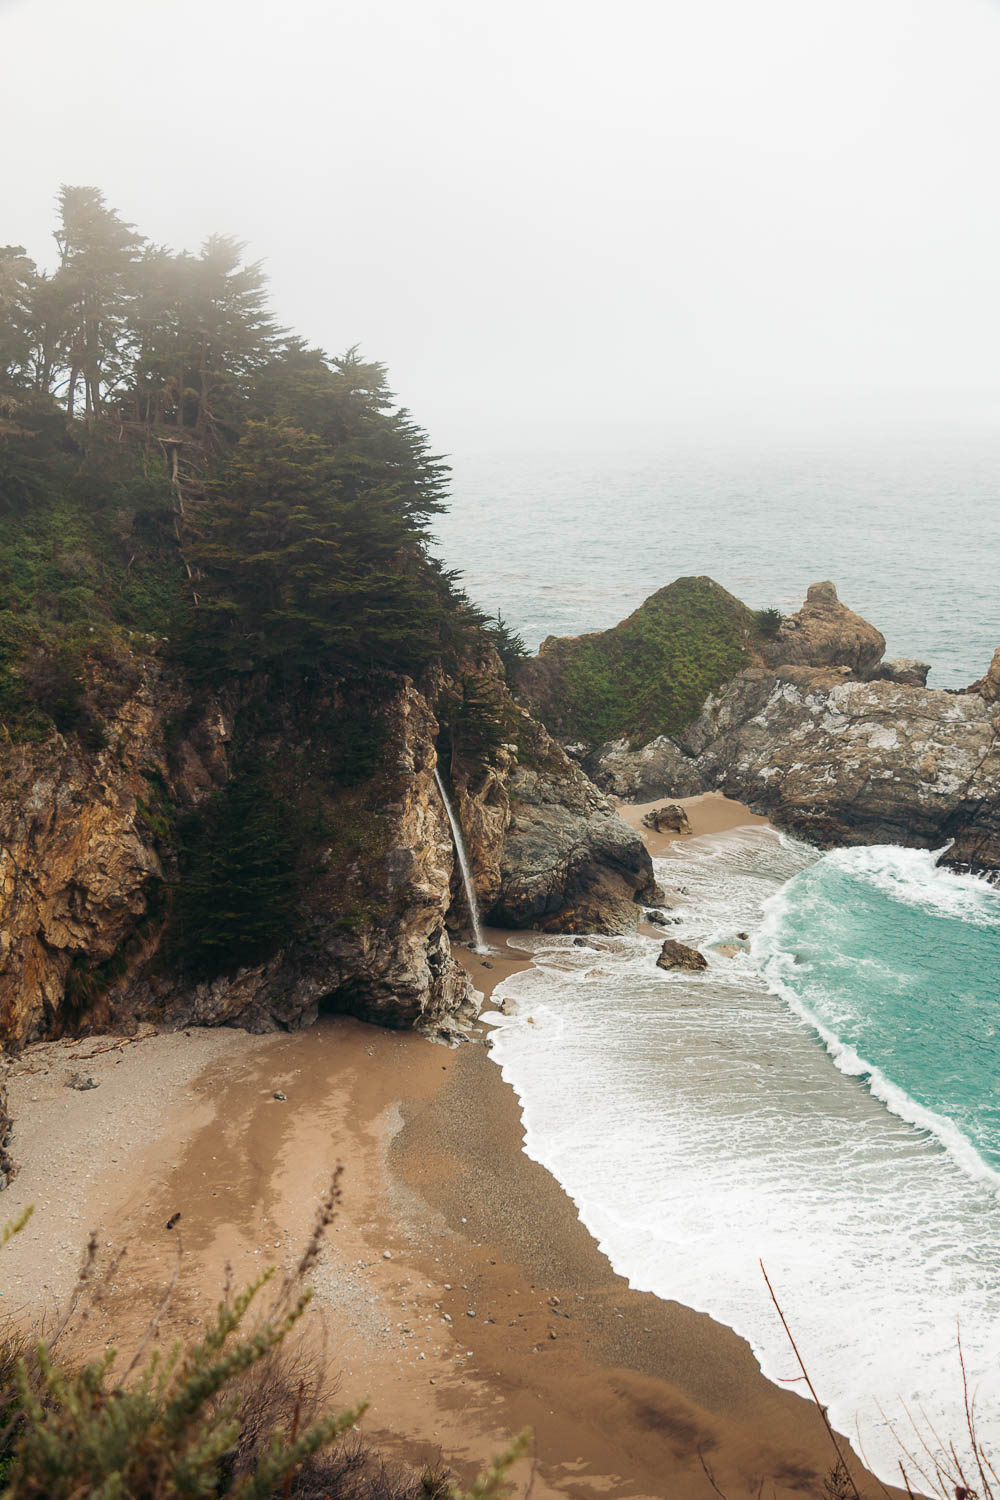 How to visit McWay Falls, Big Sur - Roads and Destinations